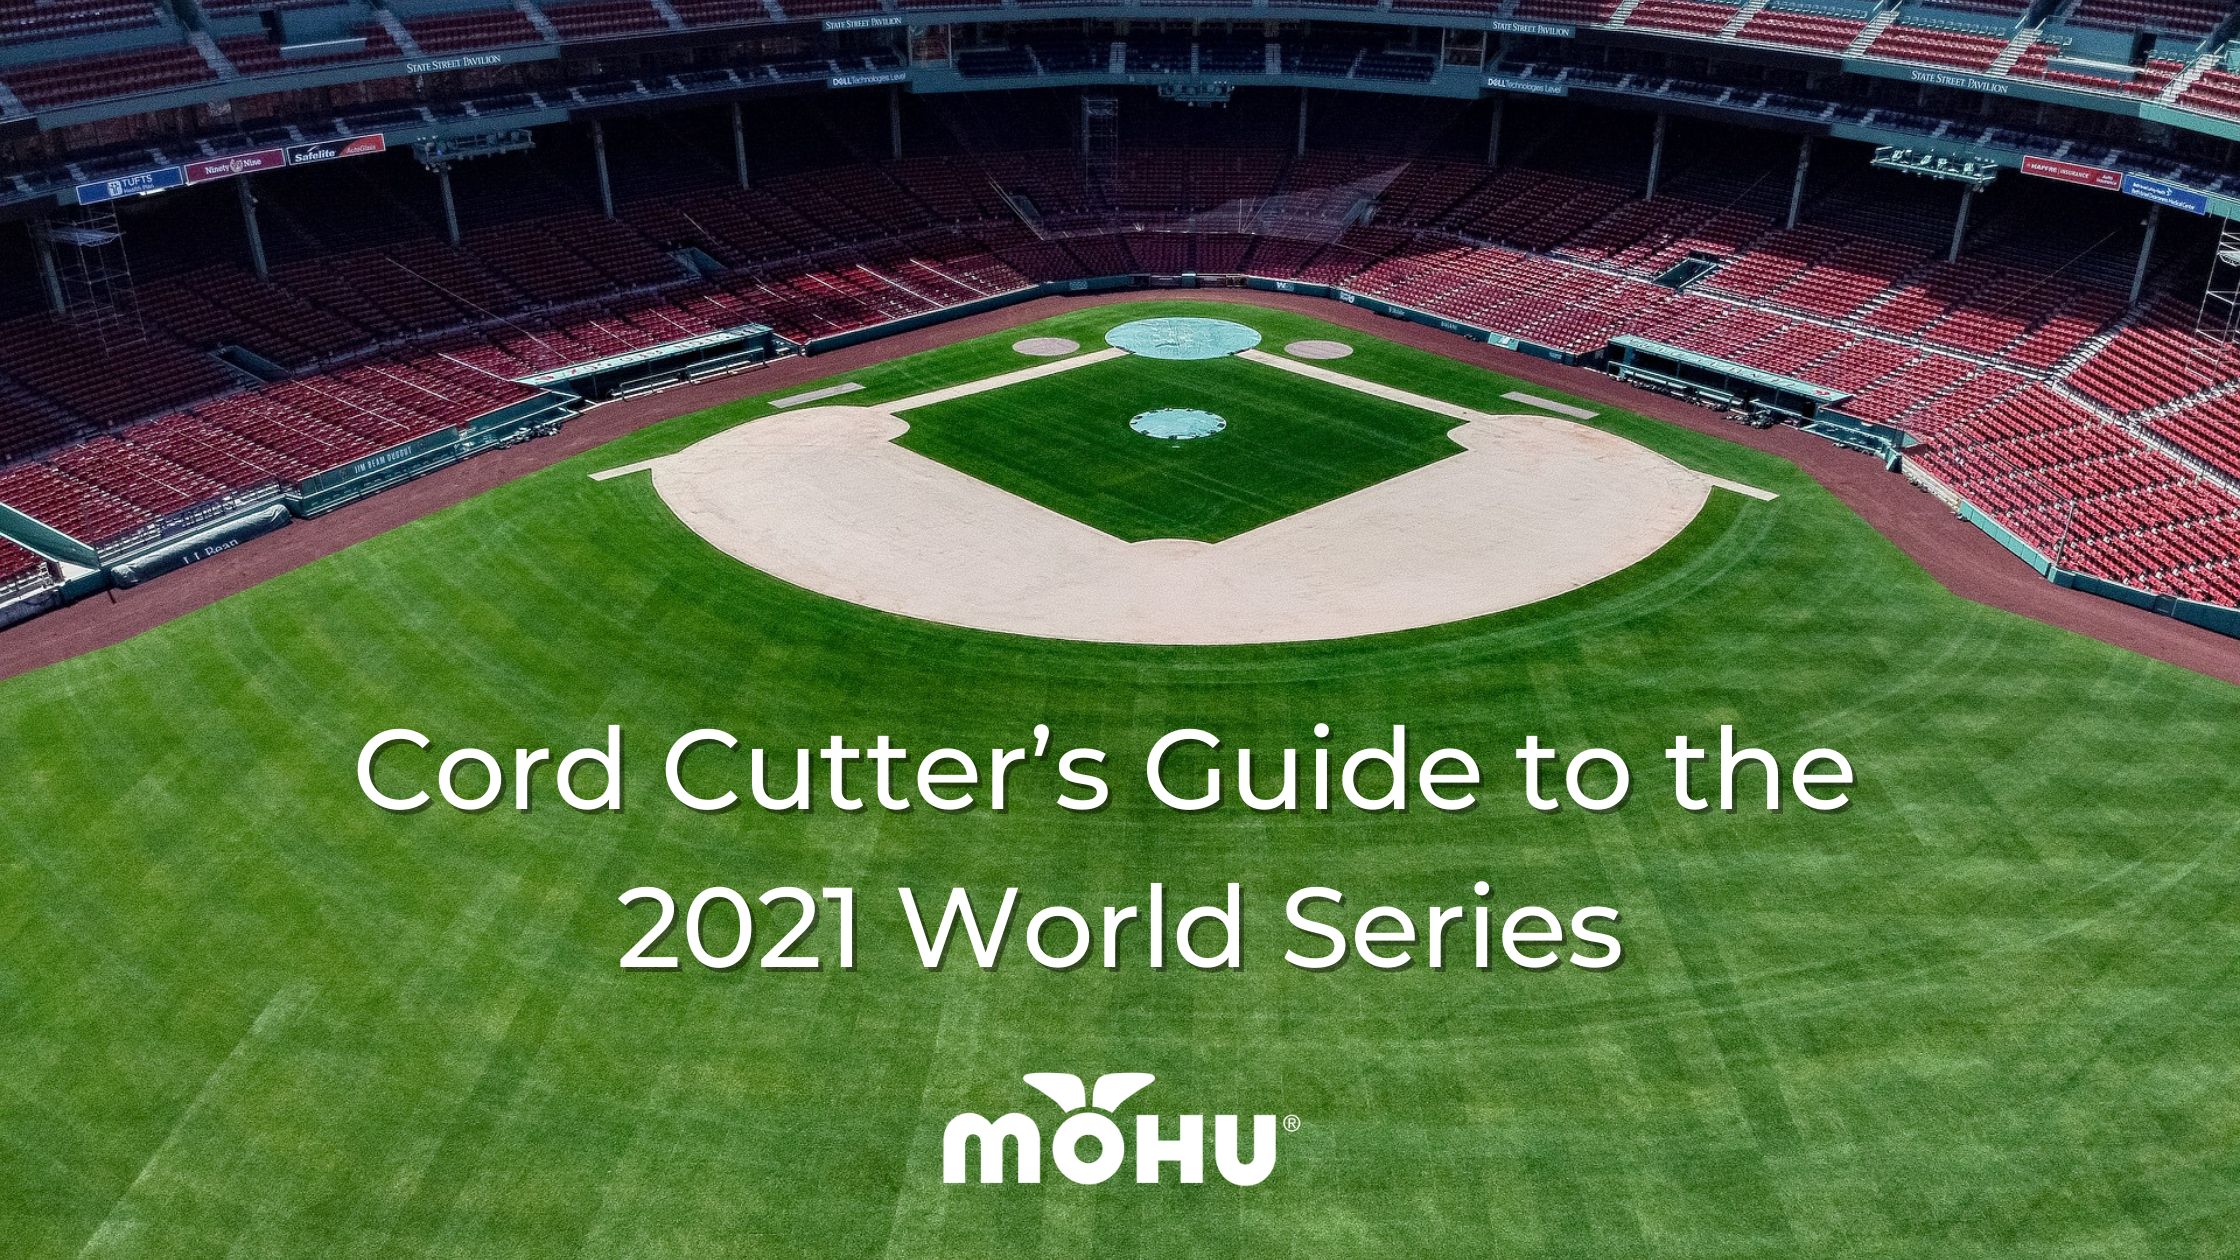 Empty baseball field, Mohu logo, Cord Cutter's Guide to the 2021 World Series